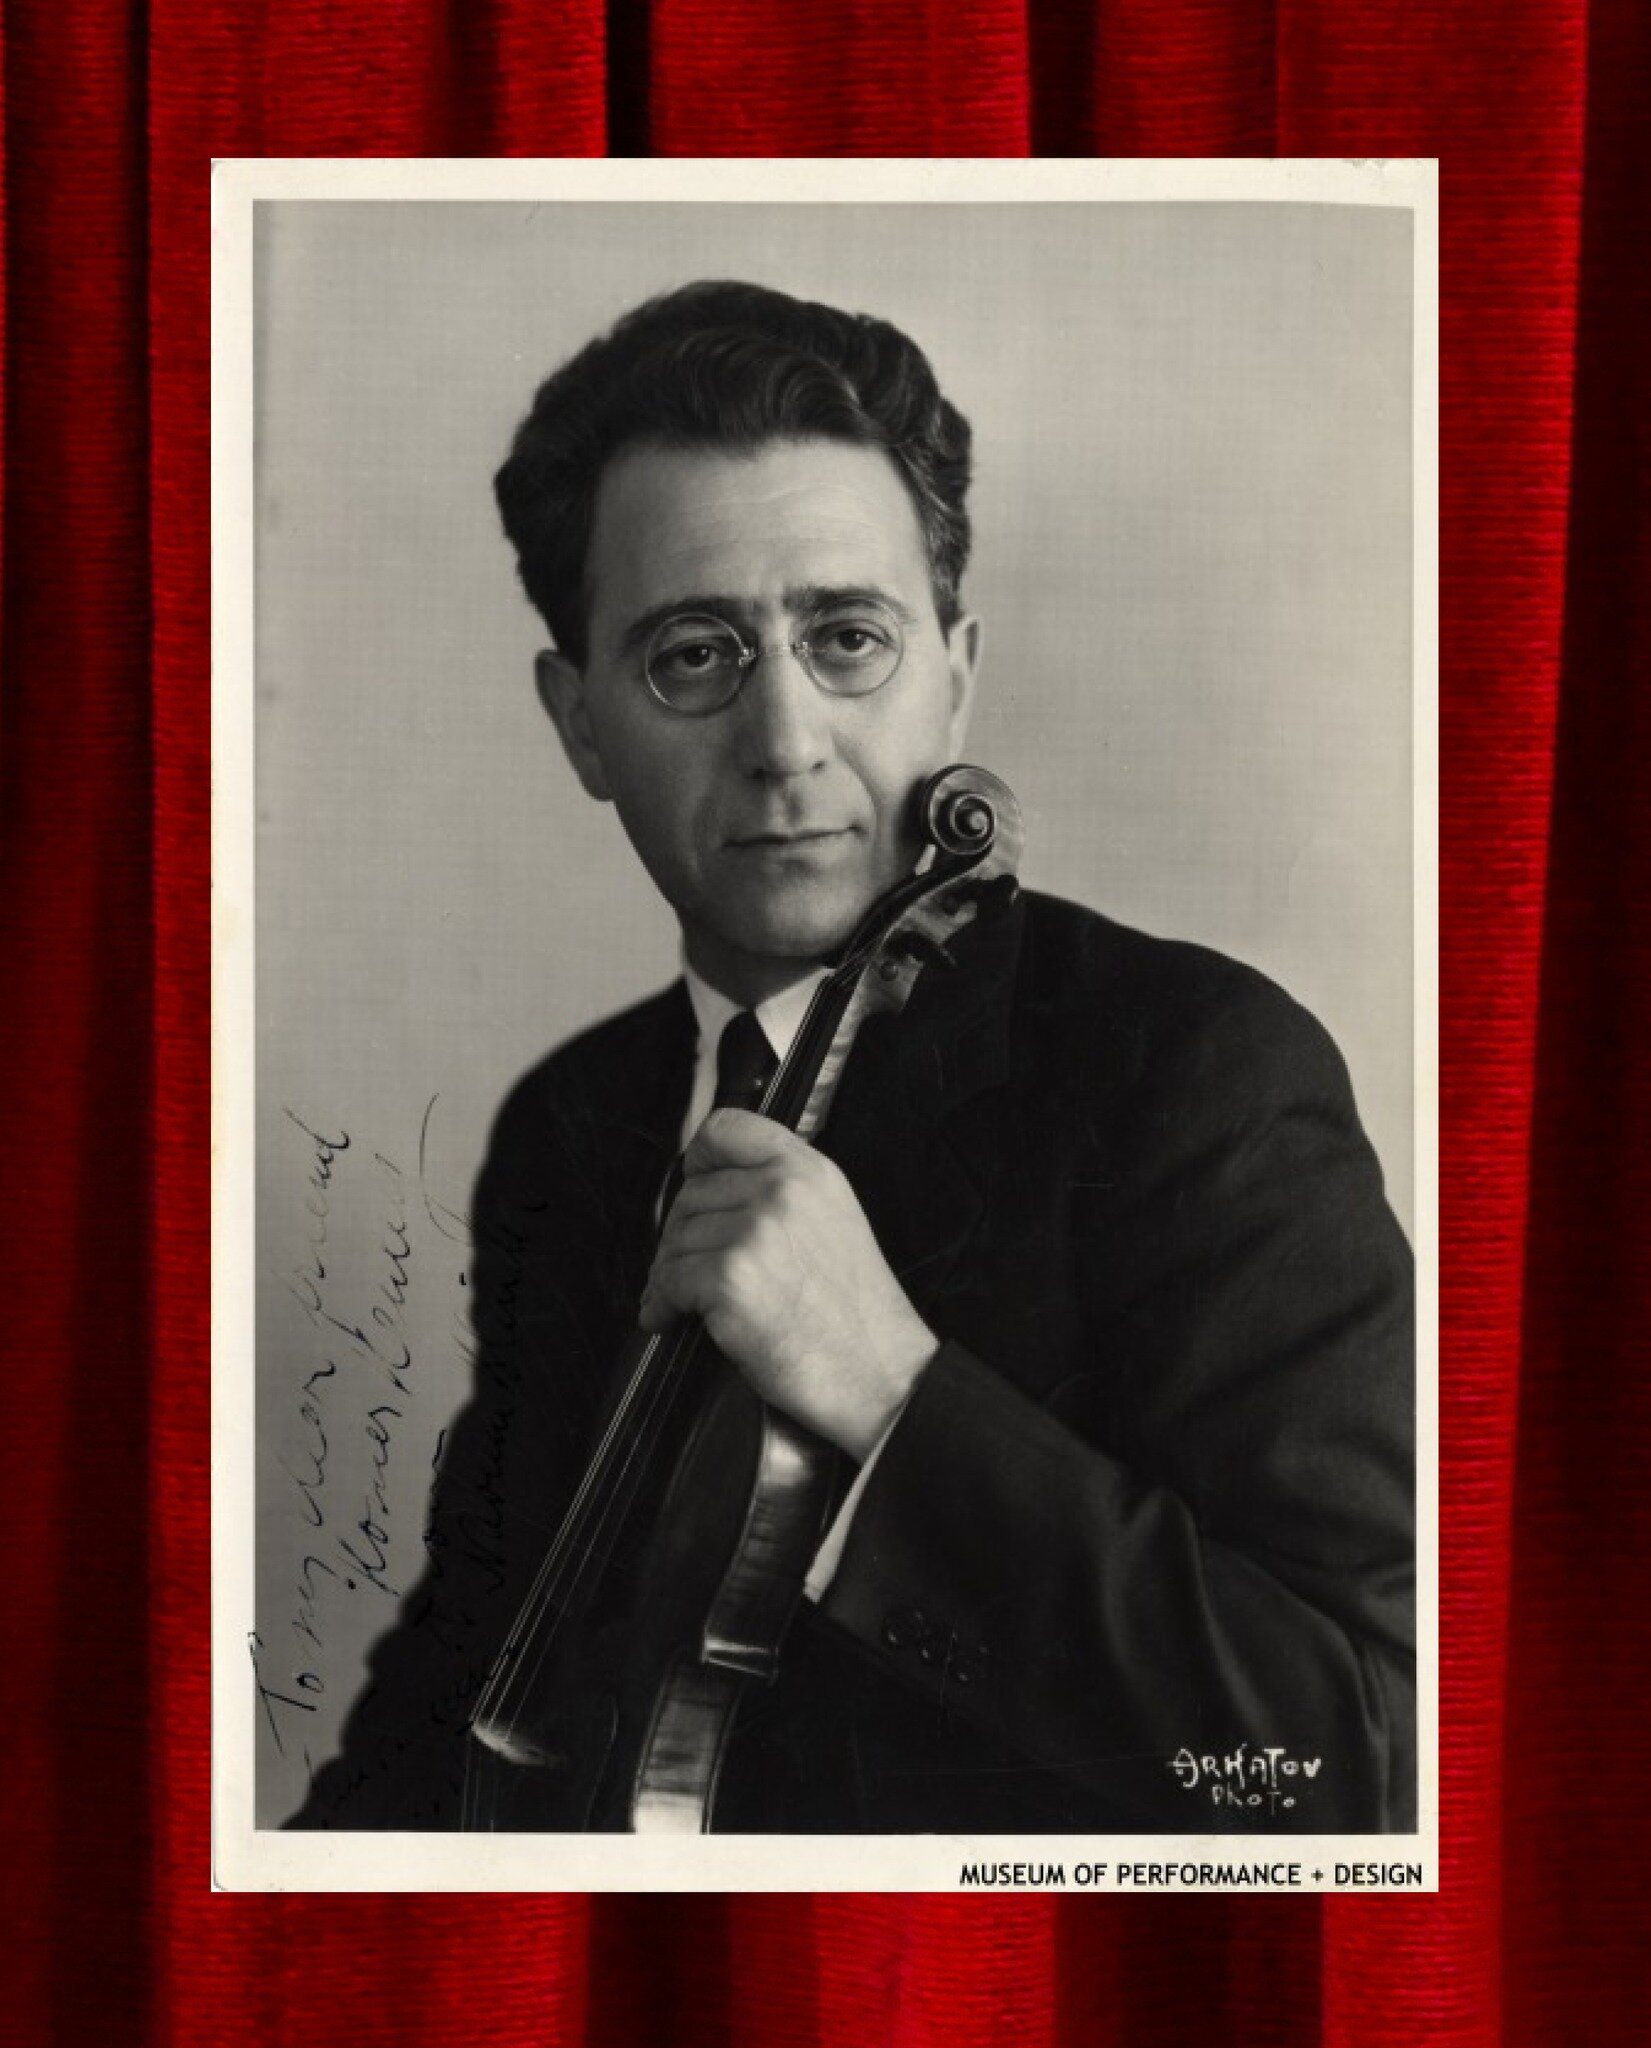 On This Day, 1934.

On January 27, 1934, violinist Naoum Blinder (1889-1965) appeared as a Guest Artist with the San Francisco Symphony. Born in the Ukraine, Blinder studied at the Imperial Conservatory in Odessa and with Adolph Brodsky at the Royal 